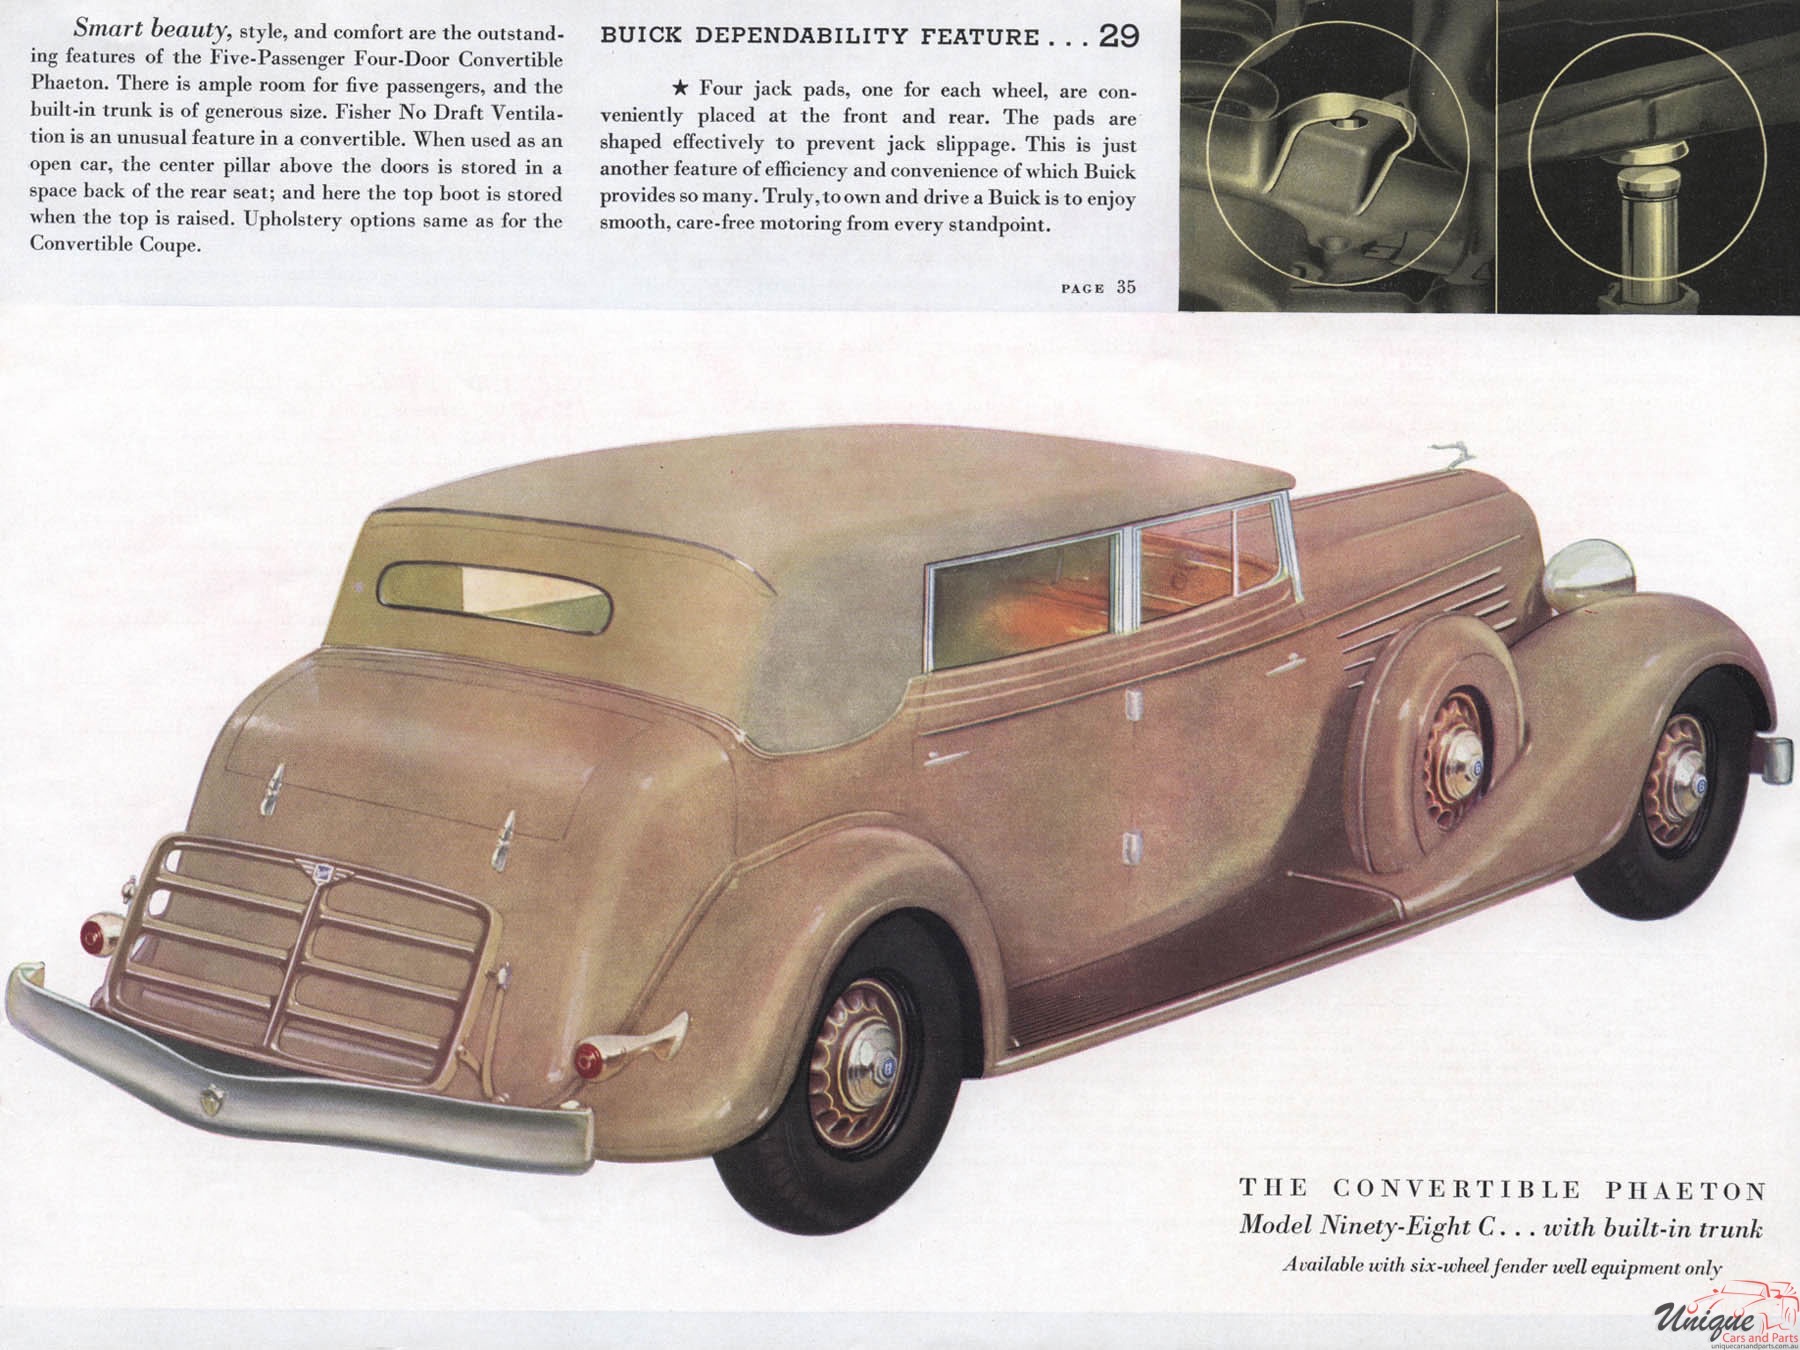 1935 Buick Brochure Page 31